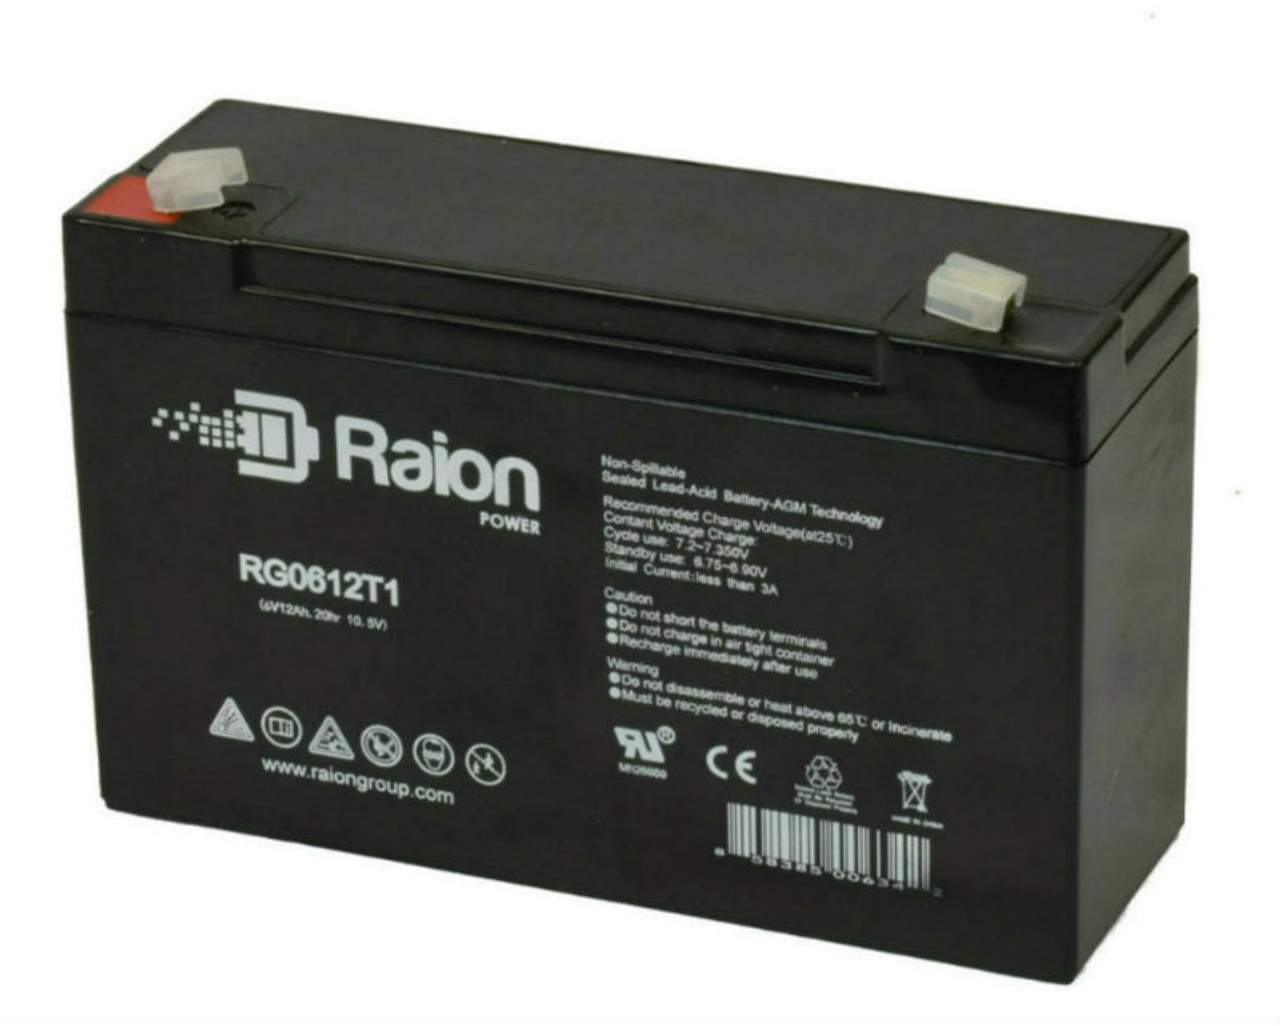 Raion Power RG06120T1 Replacement Battery for B&B Battery BP10-6-F1